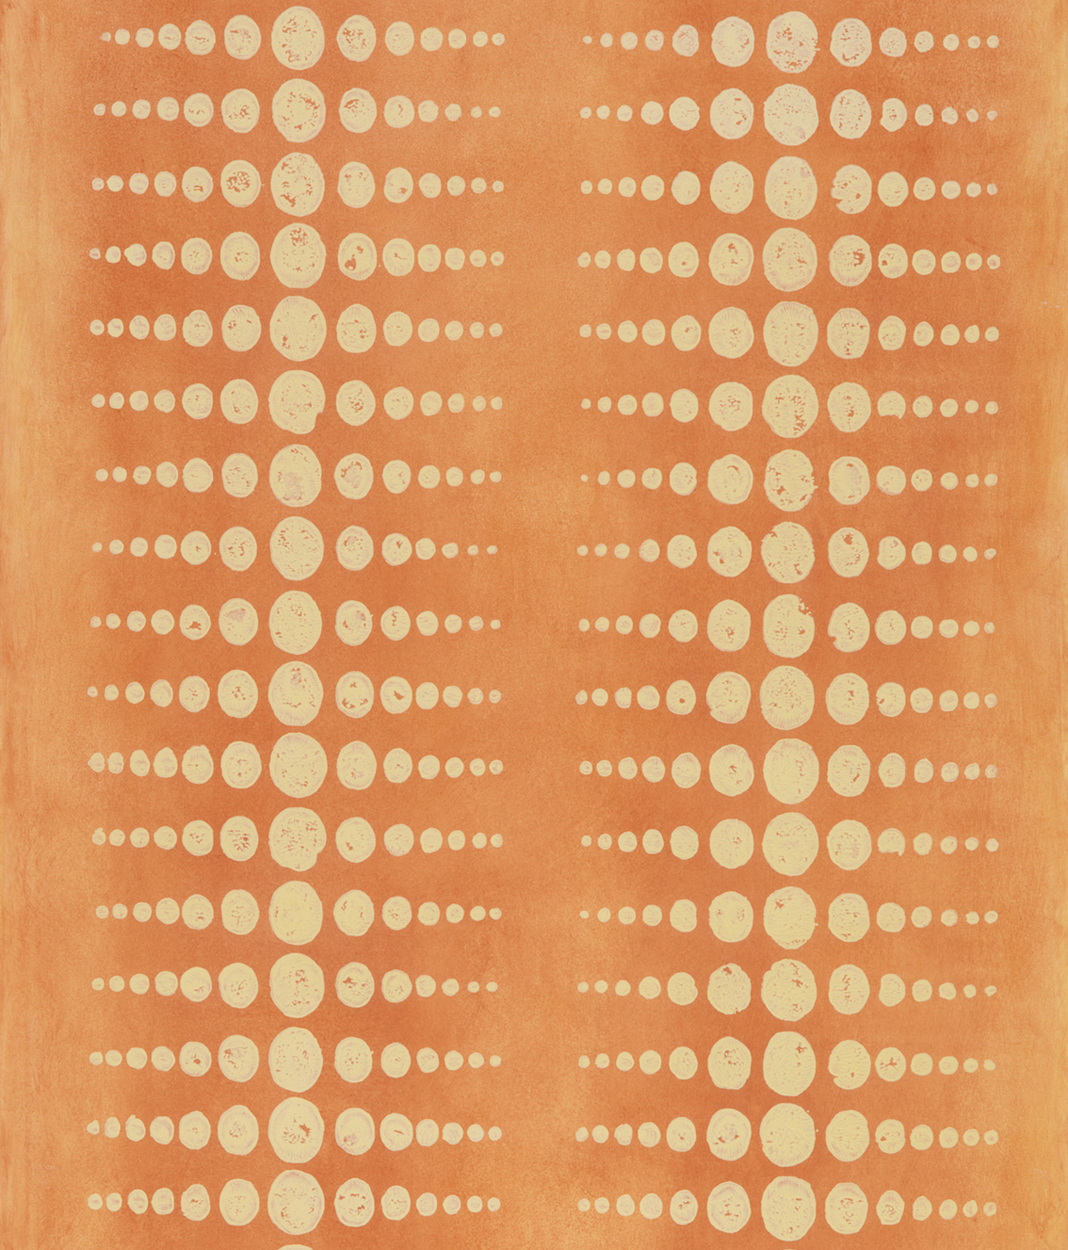 Two columns of scaled dots in pale yellow printed against a background which shades from light to dark orange. The largest dot is printed against the darkest orange. This is the cantaloupe colorway.